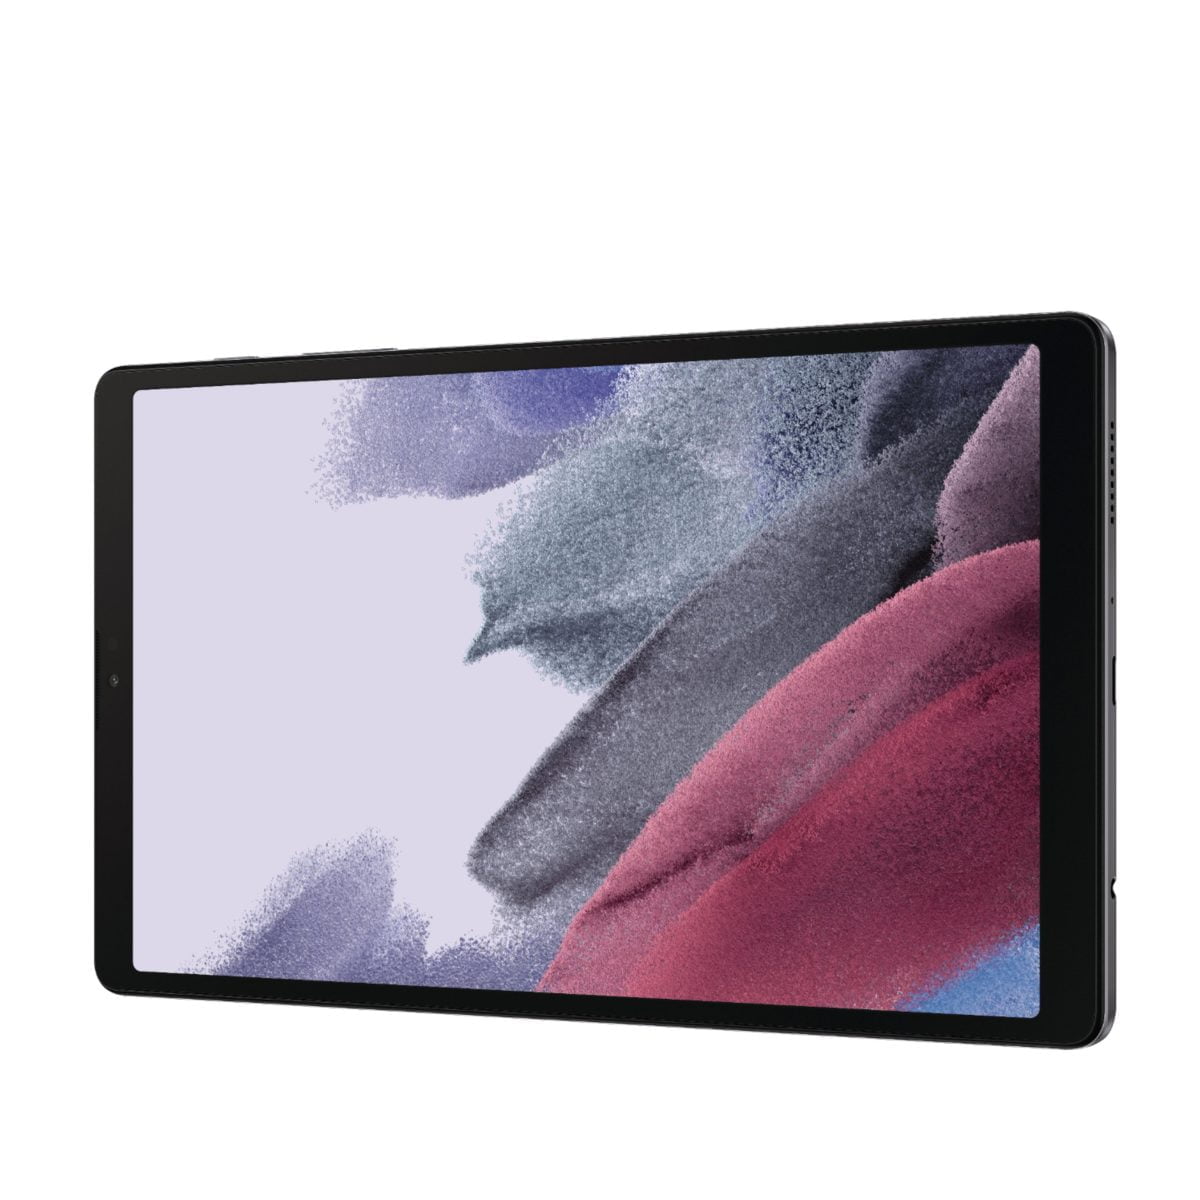 6464584Cv13D Scaled Samsung &Lt;H1&Gt;Samsung Galaxy Tab A7 Lite 32Gb - ‎Dark Gray&Lt;/H1&Gt; Meet The Device Your Whole Family Will Love: Samsung Galaxy Tab A7 Lite, The Tablet That'S Made To Be Shared. With Its Compact 8.7&Quot; Screen, Galaxy Tab A7 Lite Is Perfectly Sized For Entertainment On The Go. Its Sturdy Metal Frame Is Built To Be Brought Along From The Living Room To Your Beach Vacation, Or Wherever You Want To Take It. Galaxy Tab A7 Lite Comes With Access To Hours Of Ad-Free Youtube Premium And Samsung Tv At No Extra Charge So You Can Keep The Family Happy Without Annoying Interruptions. Plus, With A Powerful Processor For Fast Streaming And Plenty Of Storage For Your Favorite Files, Galaxy Tab A7 Lite Simplifies Entertainment Needs For Everyone Under Your Roof. Samsung Galaxy Tab Samsung Galaxy Tab A7 Lite 32Gb Cellular - ‎Dark Gray